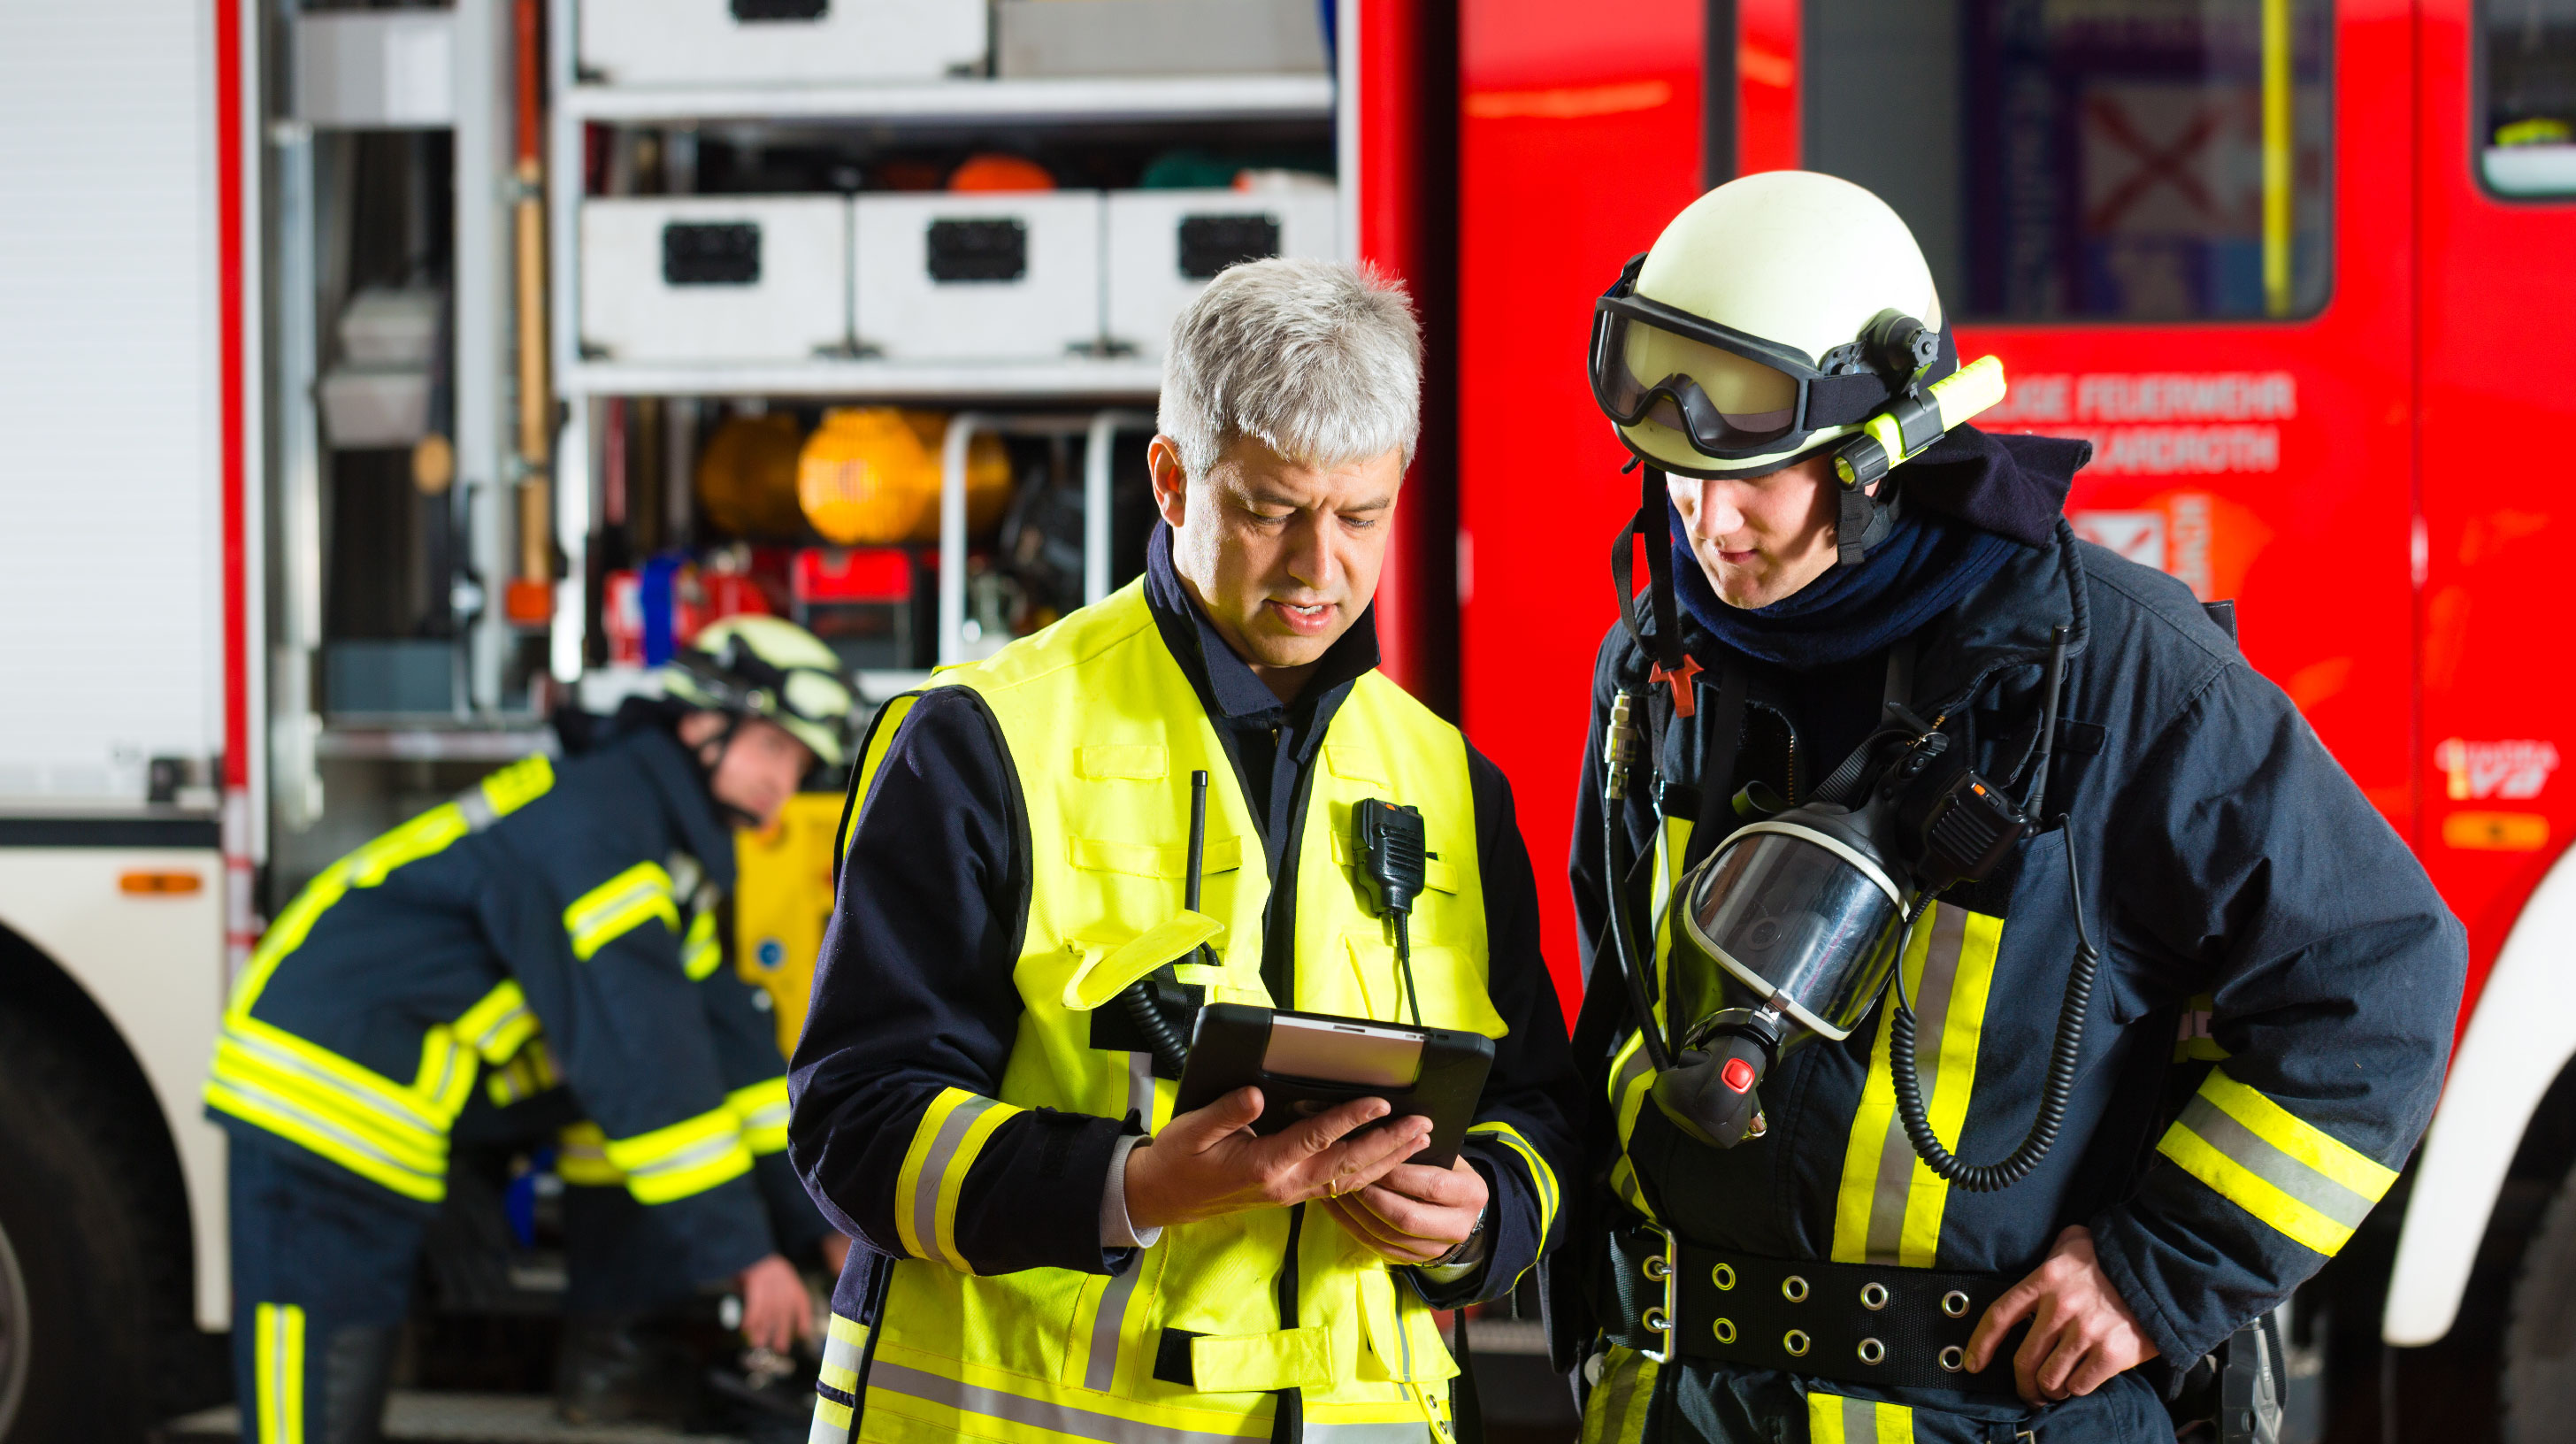 A safer world is mapped in the cloud - Esri and Microsoft webinar series